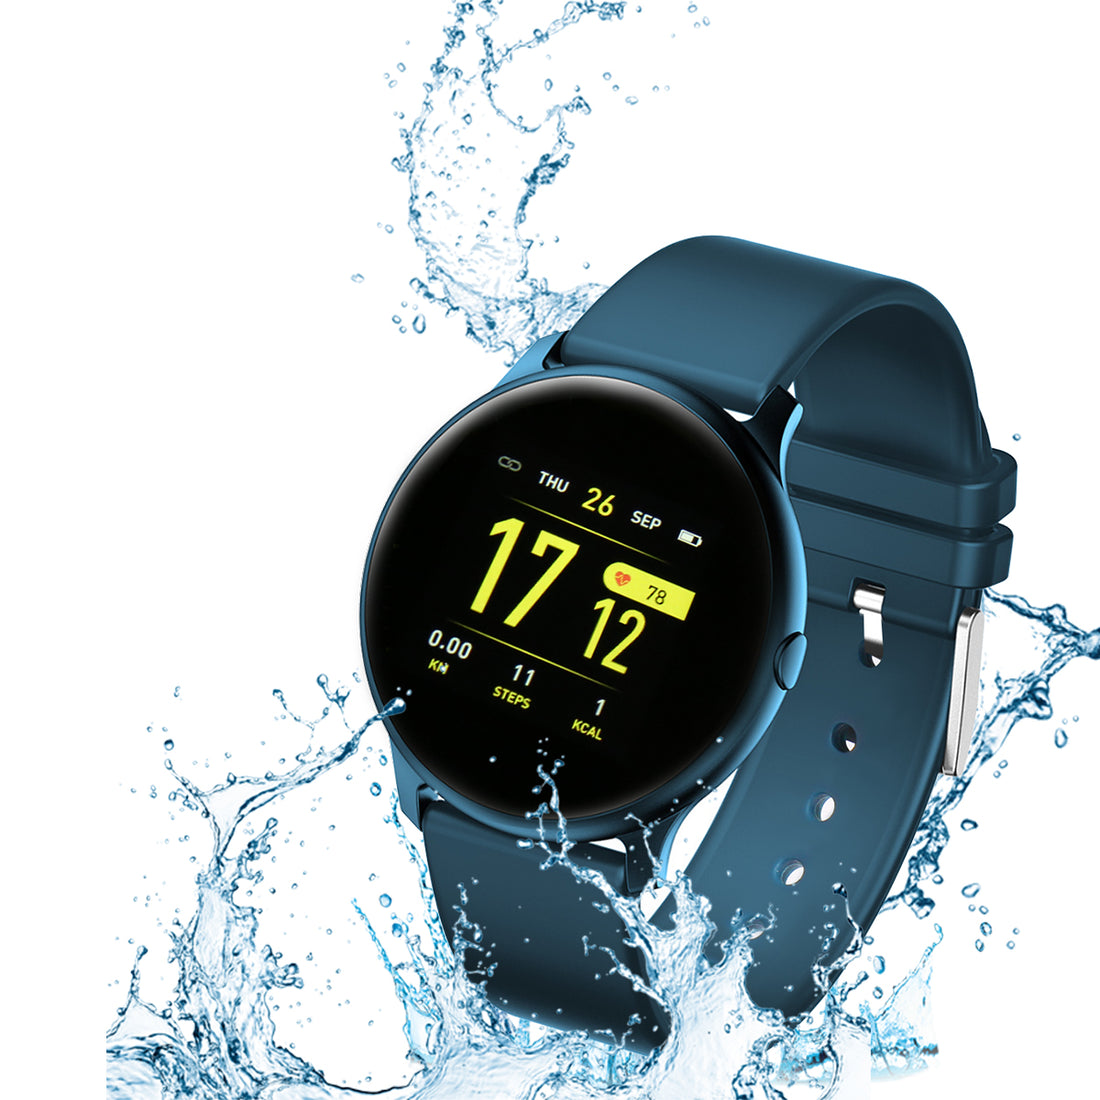 MONTRE GPS BLUETOOTH MULTISPORT COMPATIBLE IOS&ANDROID